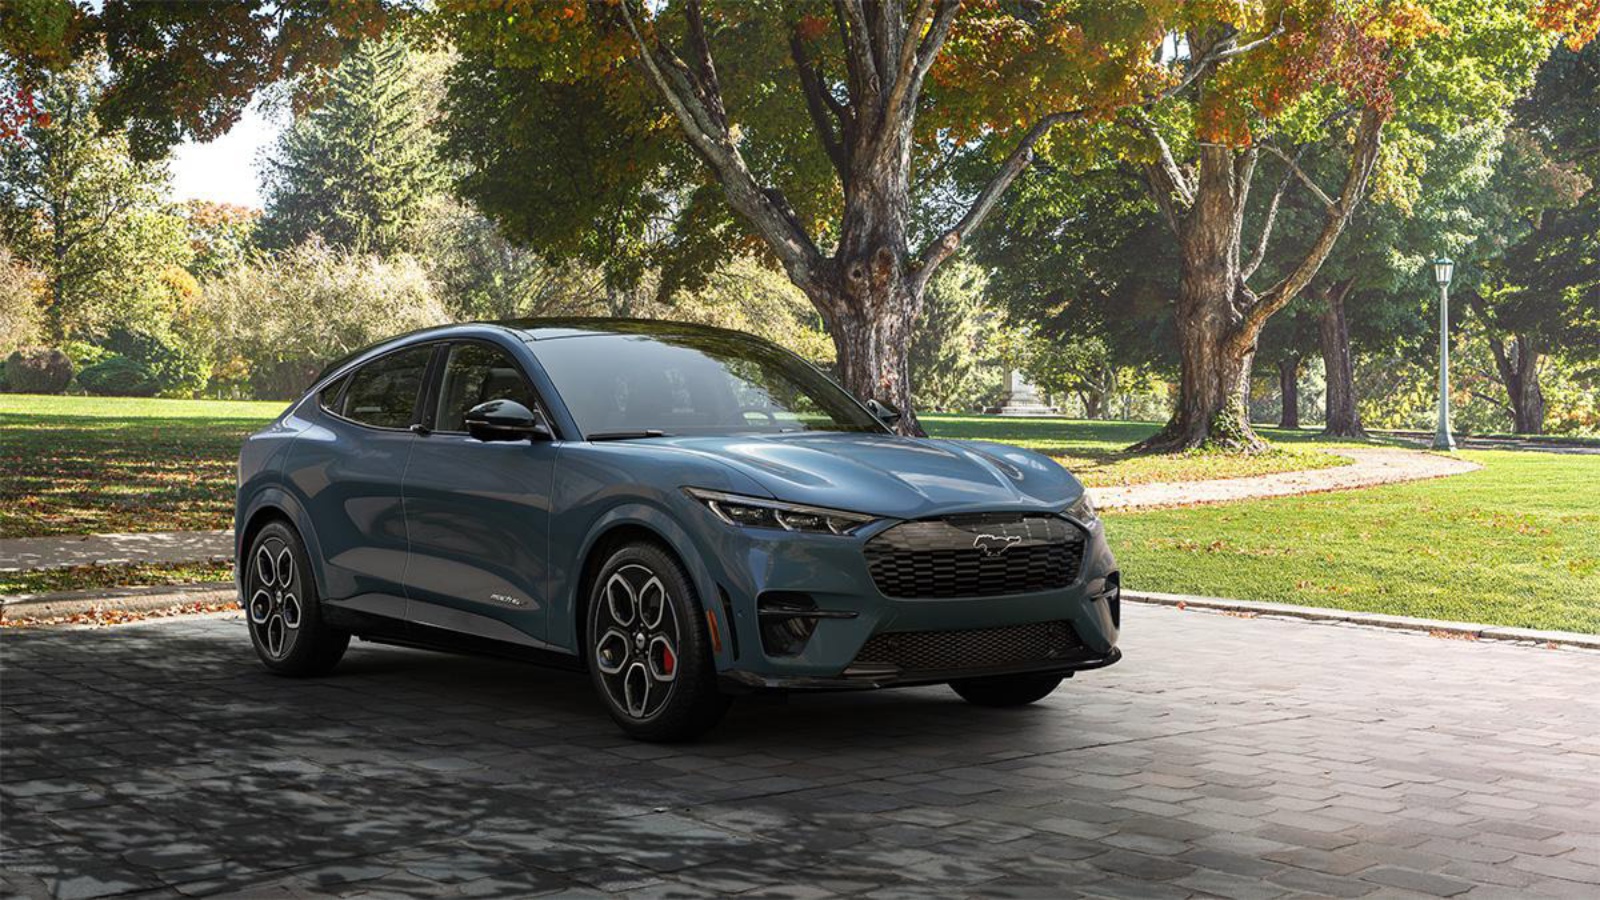 Unreliable SUVs to skip over include this new Ford Mustang Mach-E